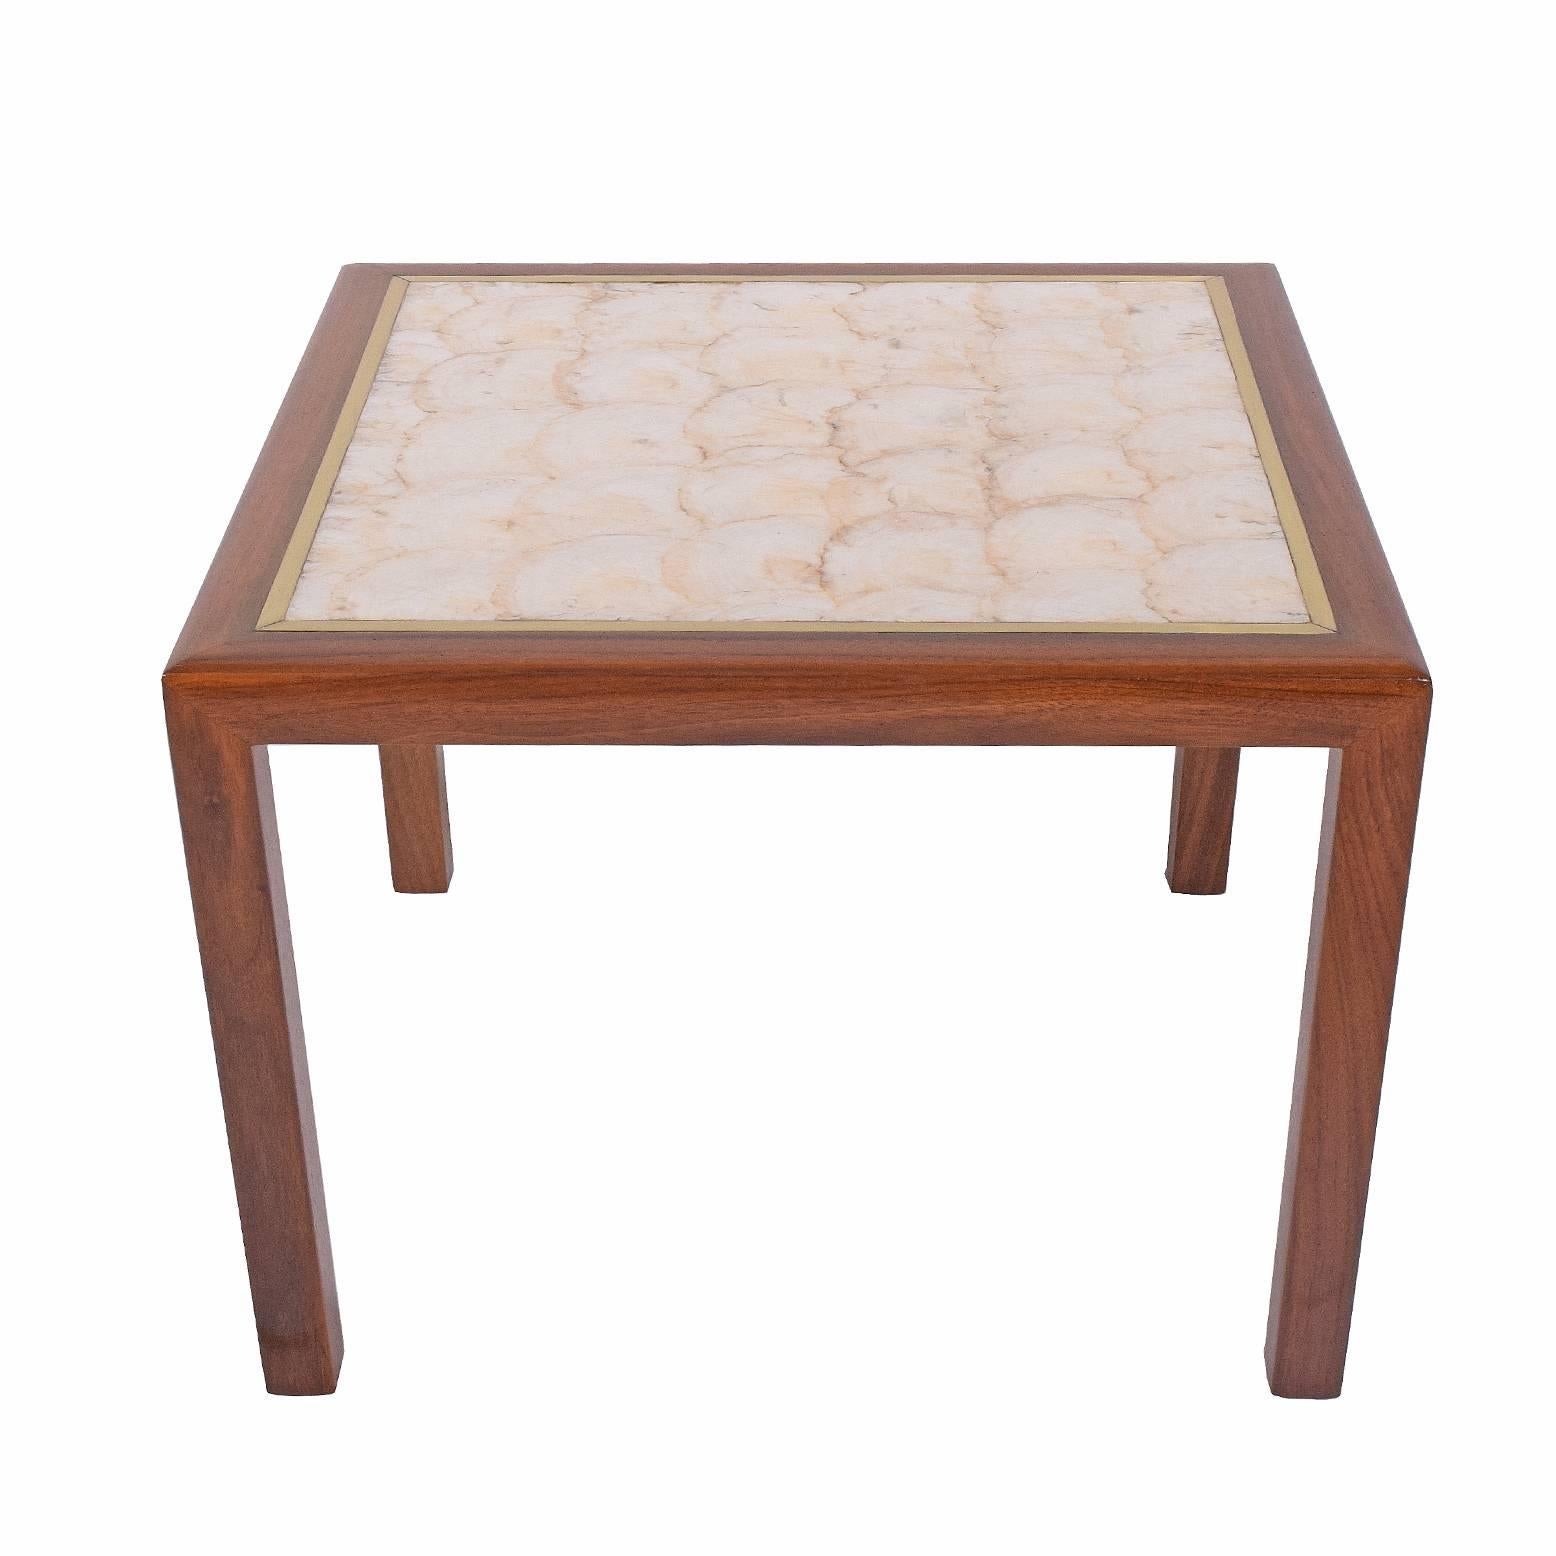 Square Side Table with Seashell Top